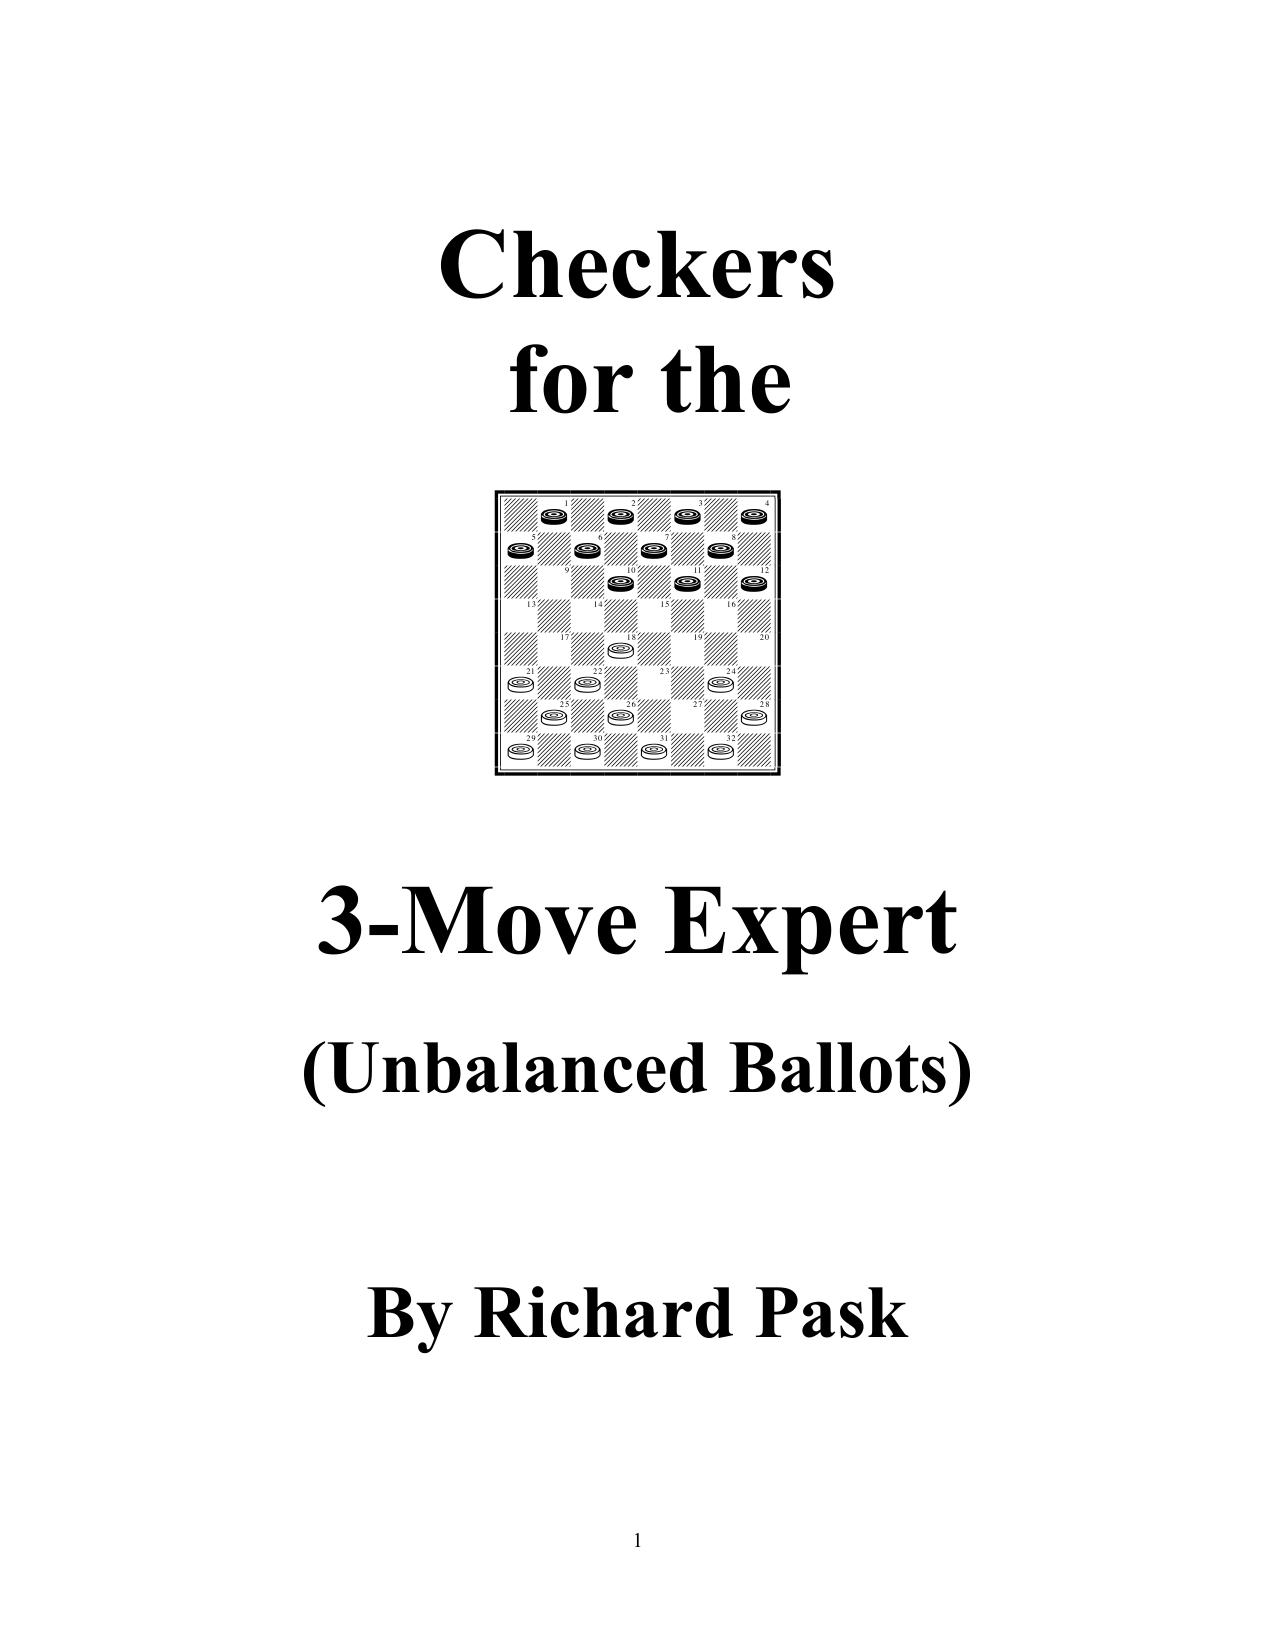 Checkers for the 3-Move Expert (Unbalanced Ballots) by Richard Pask